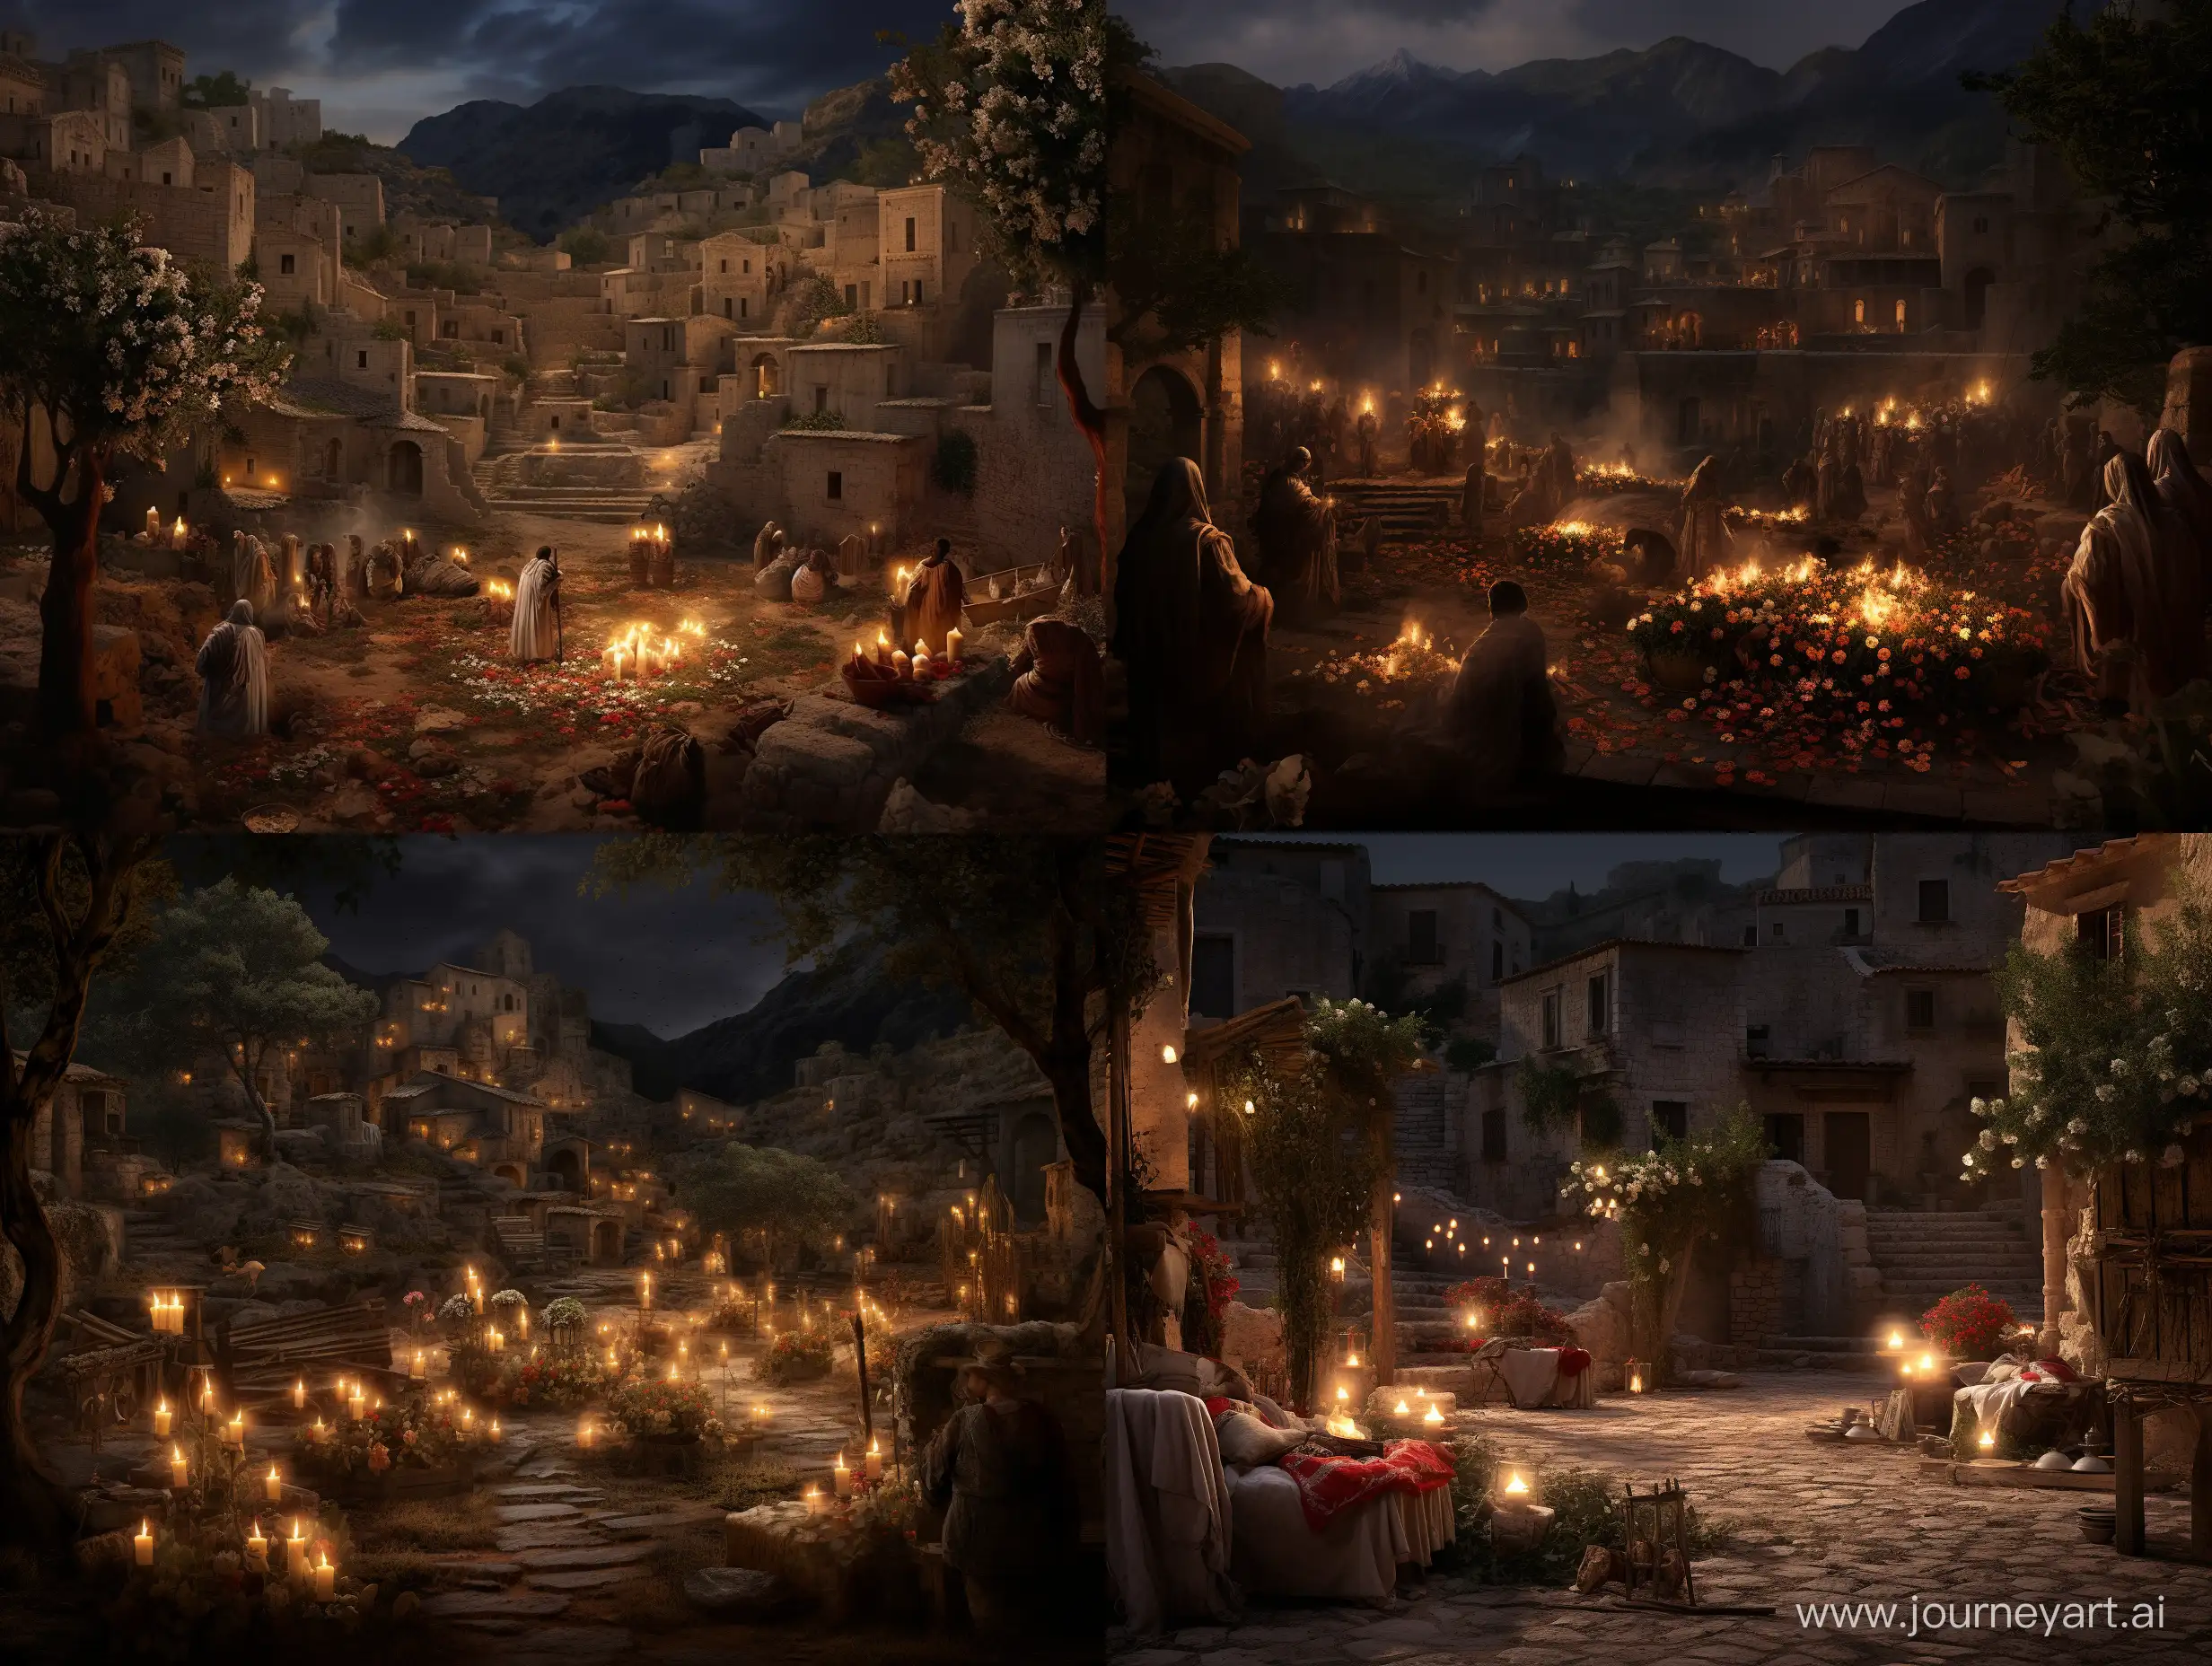 In the ancient biblical village, under the muted glow of flickering candles, a grieving community gathers in the dimly lit square, draped in somber attire. The air is thick with sorrow as the haunting strains of Mozart's Lacrimosa resonate through the ancient stone buildings. A makeshift memorial stands at the center, adorned with wilted flowers, and the villagers, their faces etched with grief, share silent reflections amid the mournful melody. The scene captures a poignant moment of collective mourning and contemplation, where the timeless music of Lacrimosa amplifies the depth of emotions, weaving a tapestry of sorrow, spirituality, and the shared human experience in the face of profound loss.